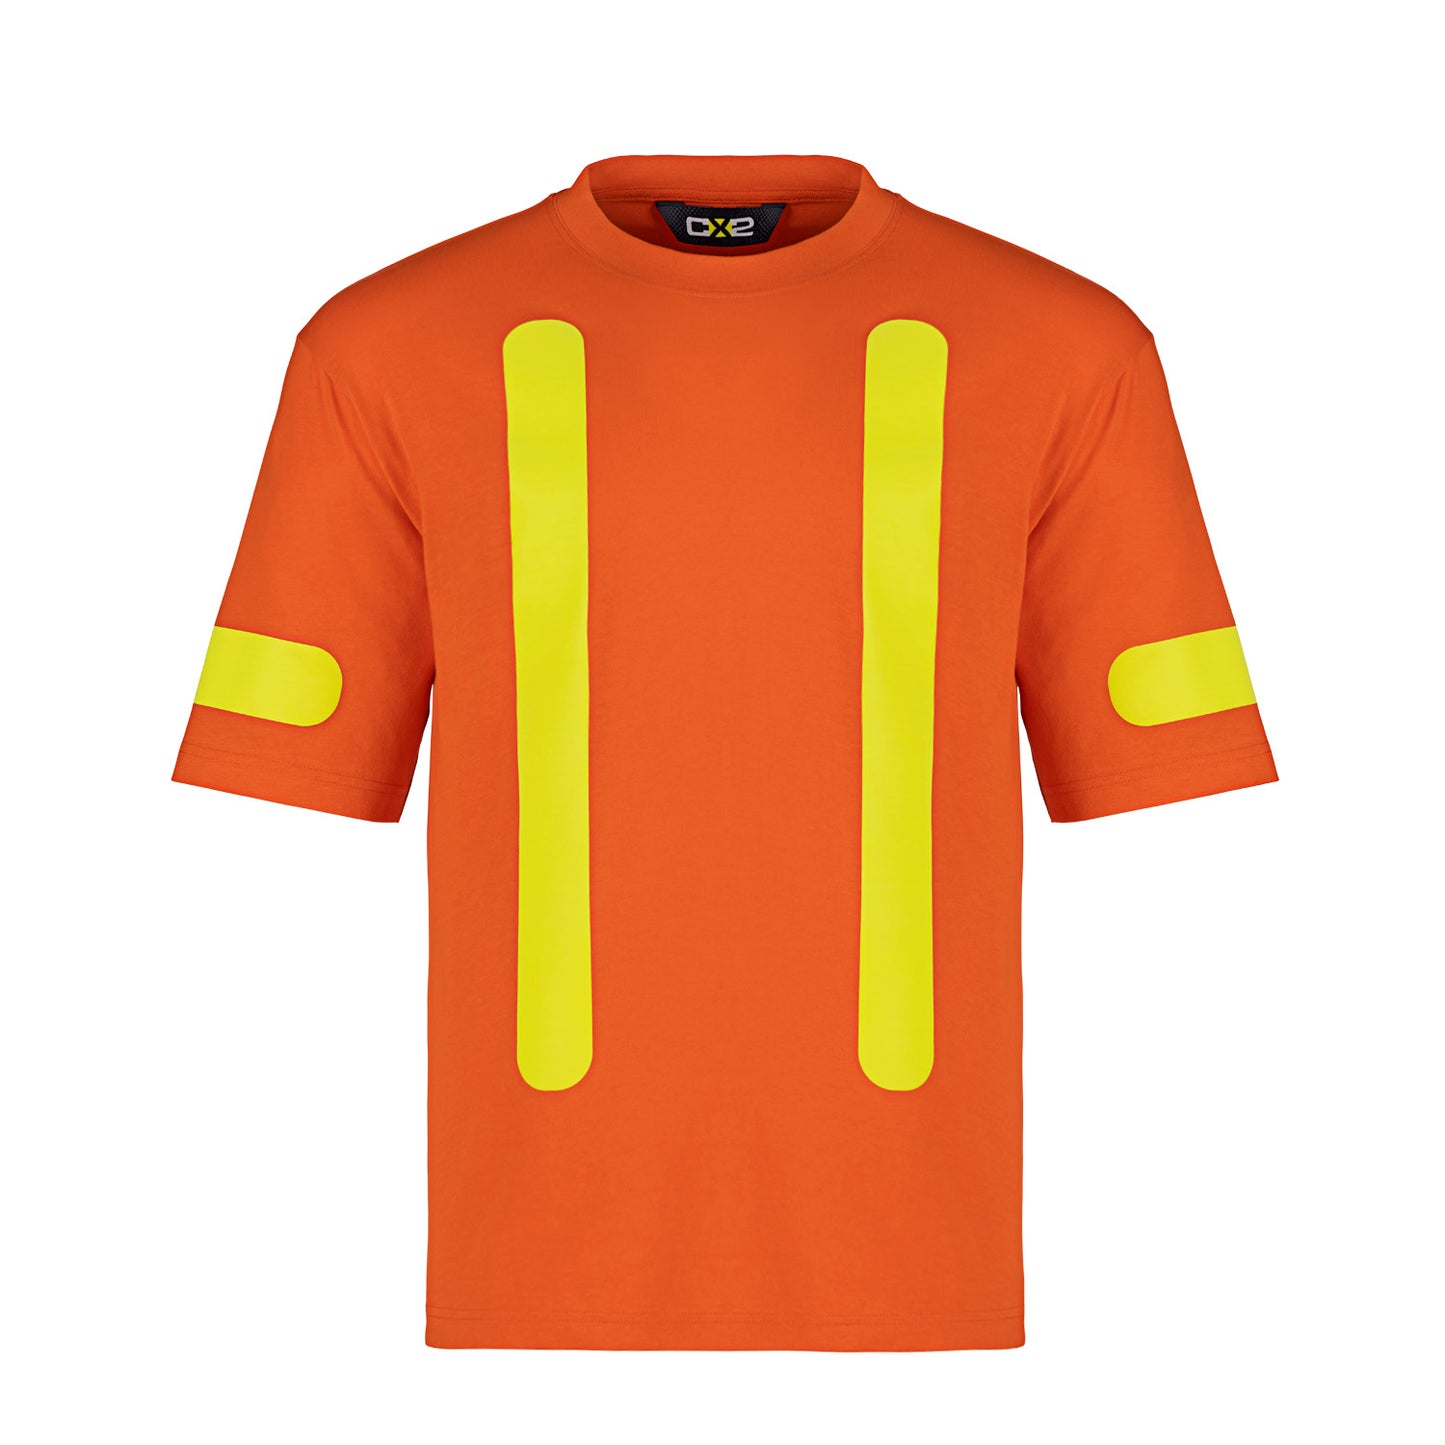 Sentry – Cotton Safety T-Shirt